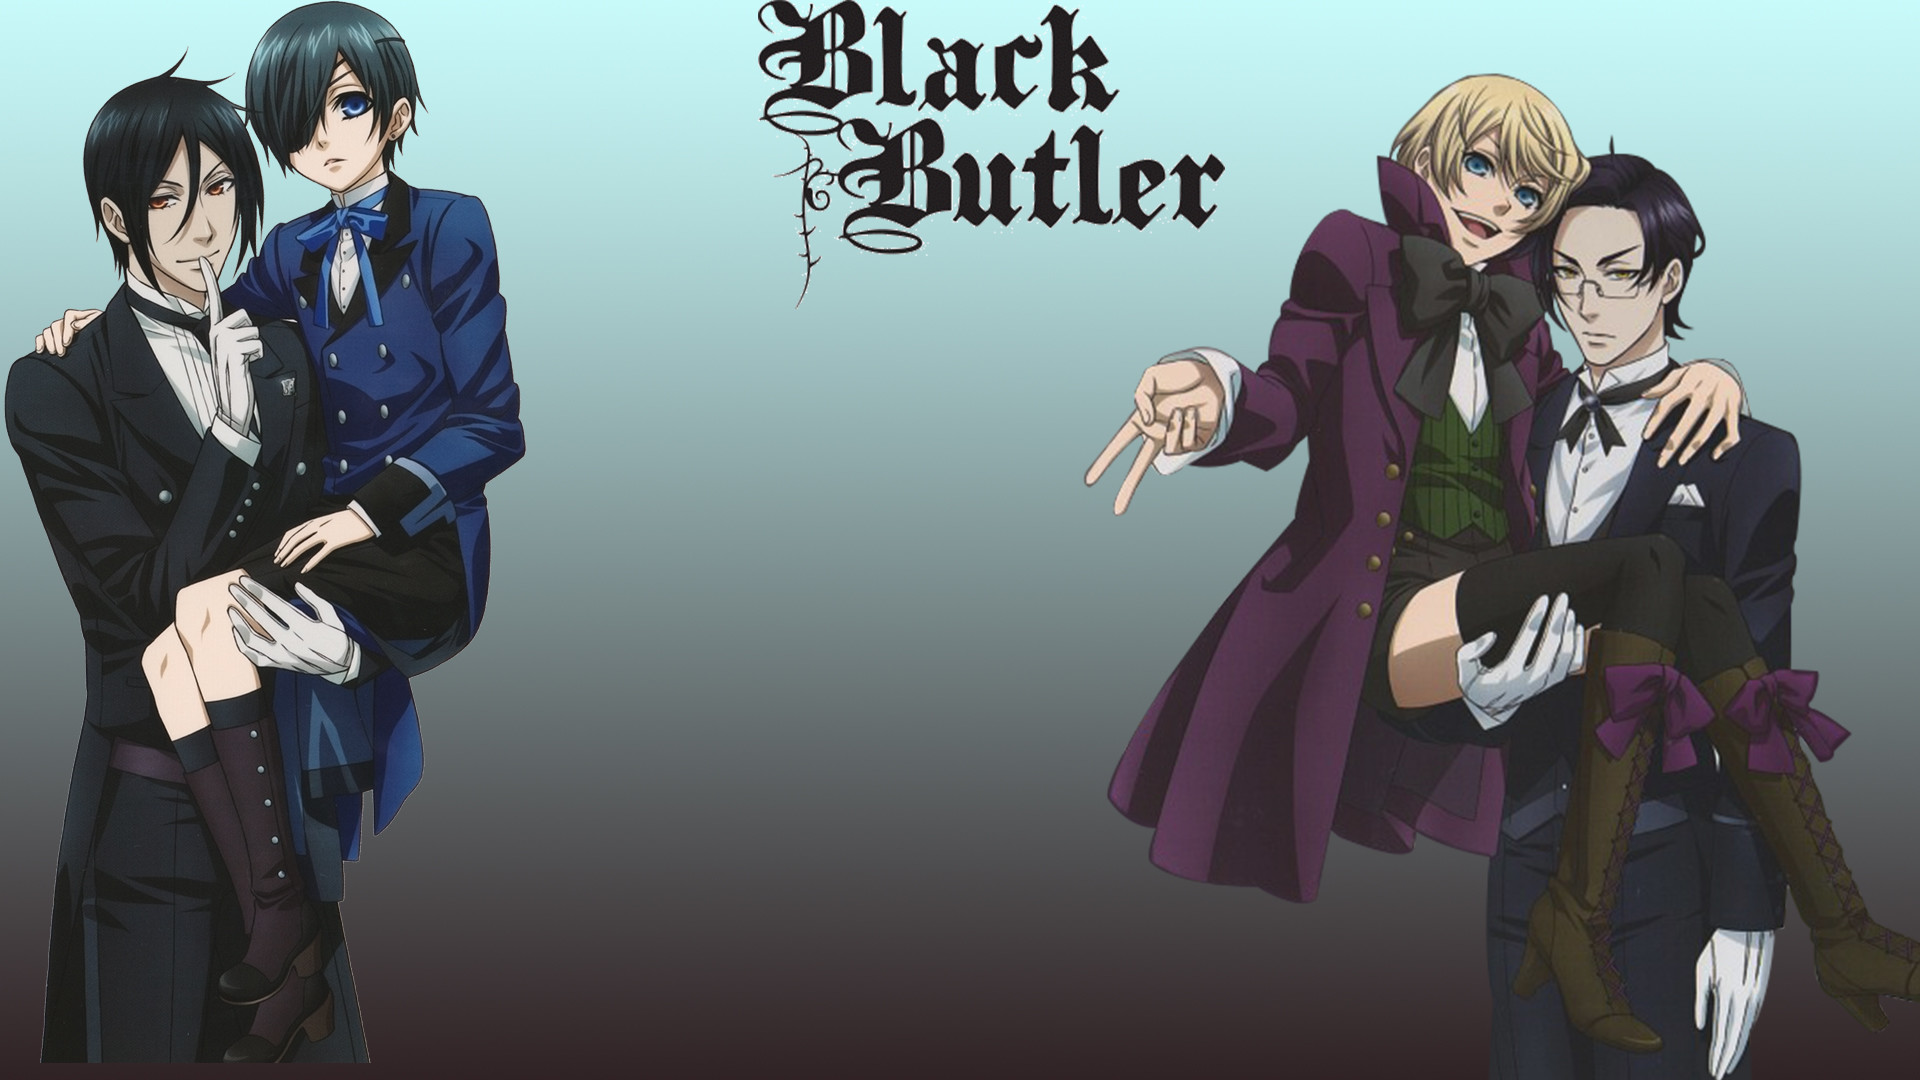 1920x1080 Free-download-black-butler-wallpapers-HD